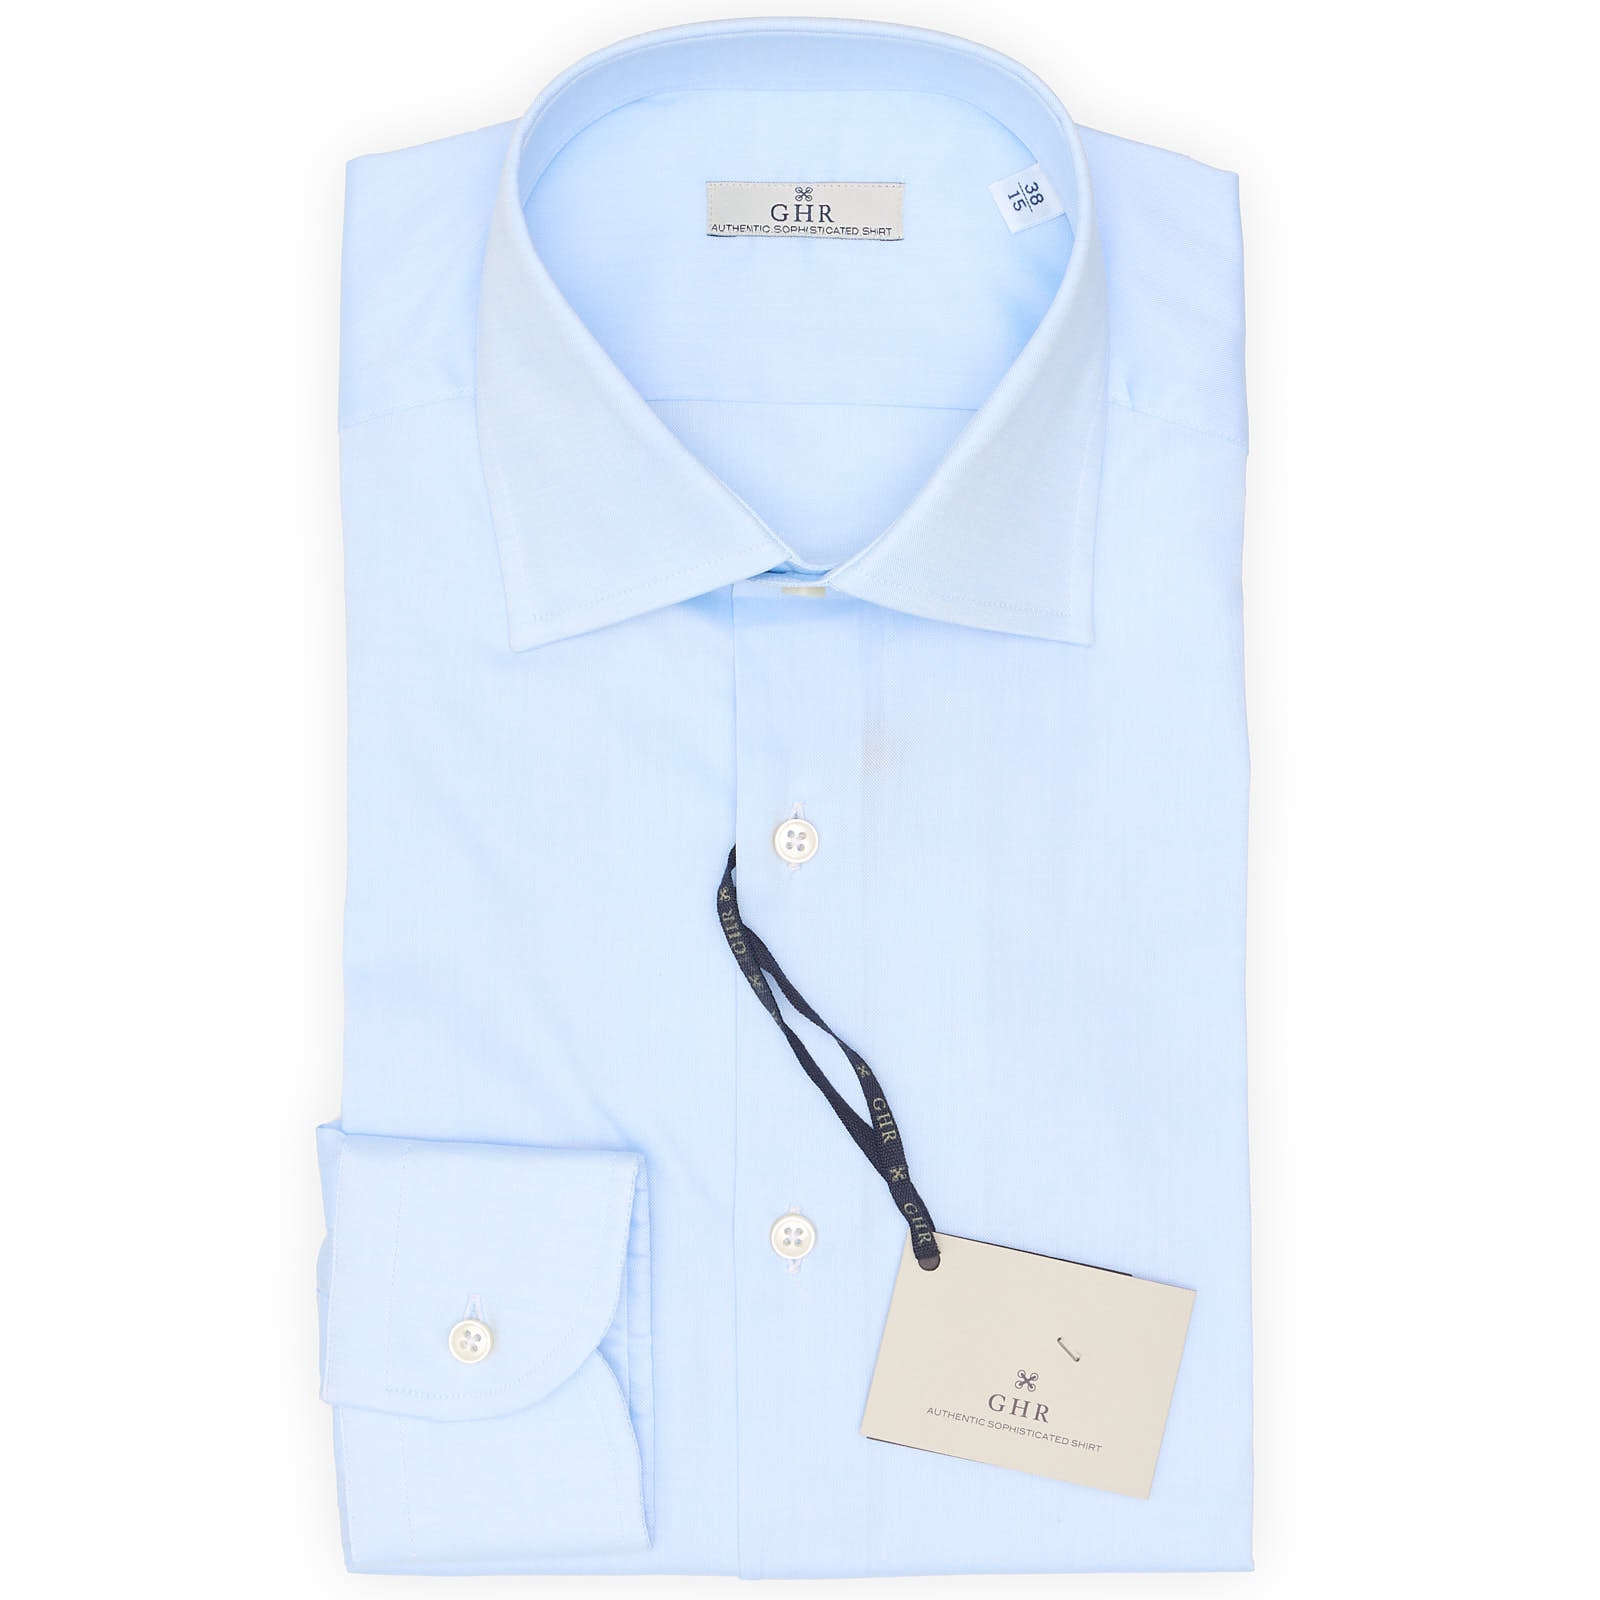 G.H.R. Blue Pinpoint Oxford Cotton Dress Shirt NEW Giampaolo and Alessandro Valoti